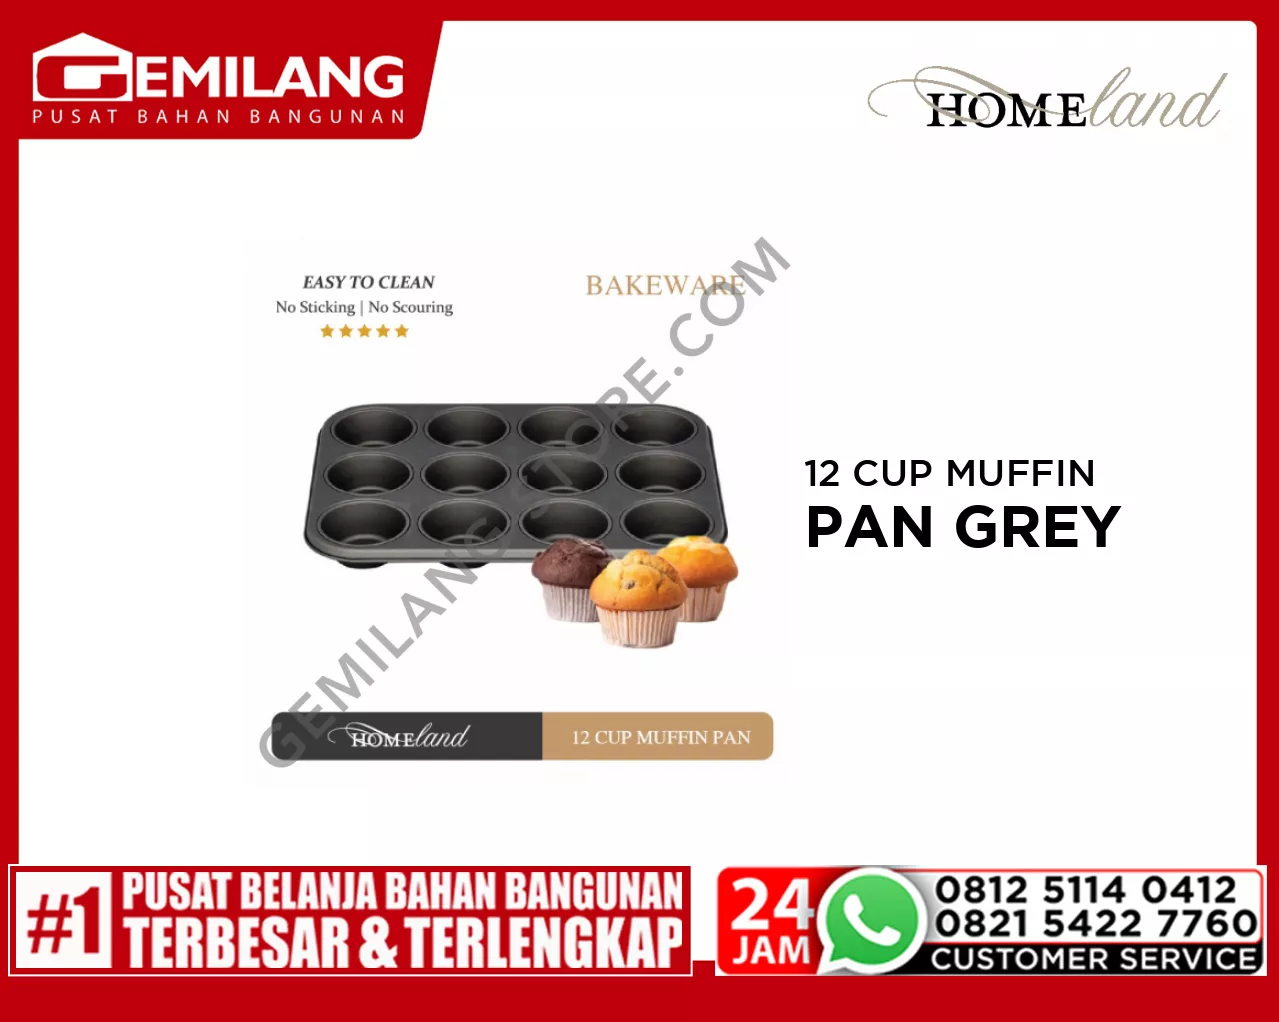 HOMELAND 12 CUP MUFFIN PAN GREY